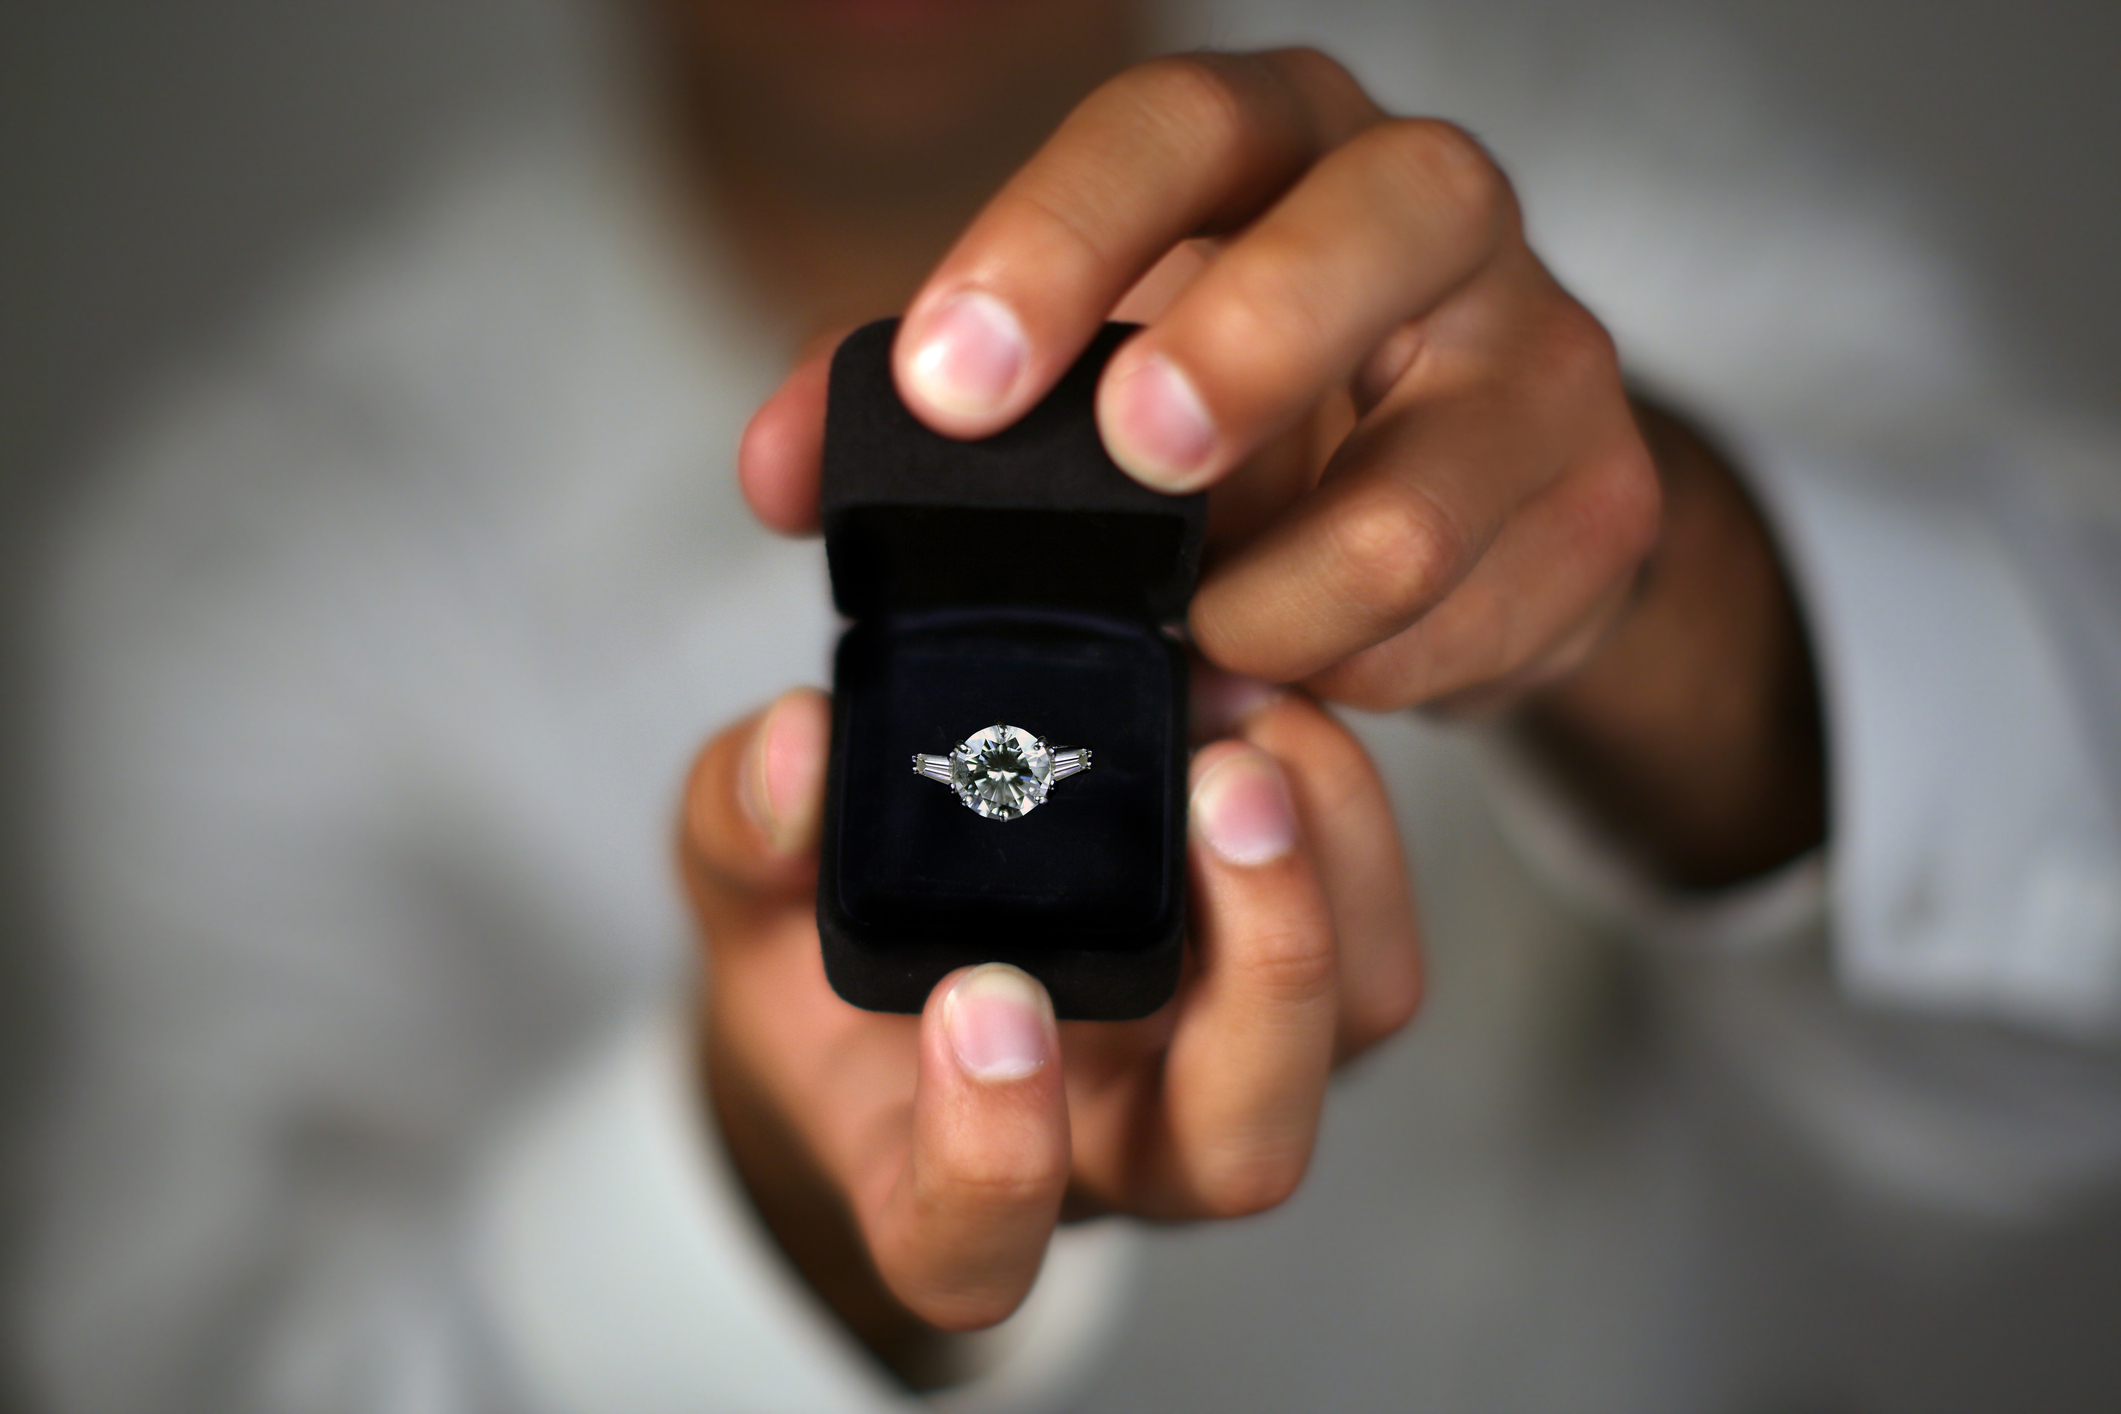 Internet Obsessed With Man Who Decides This Is Perfect Moment To Propose